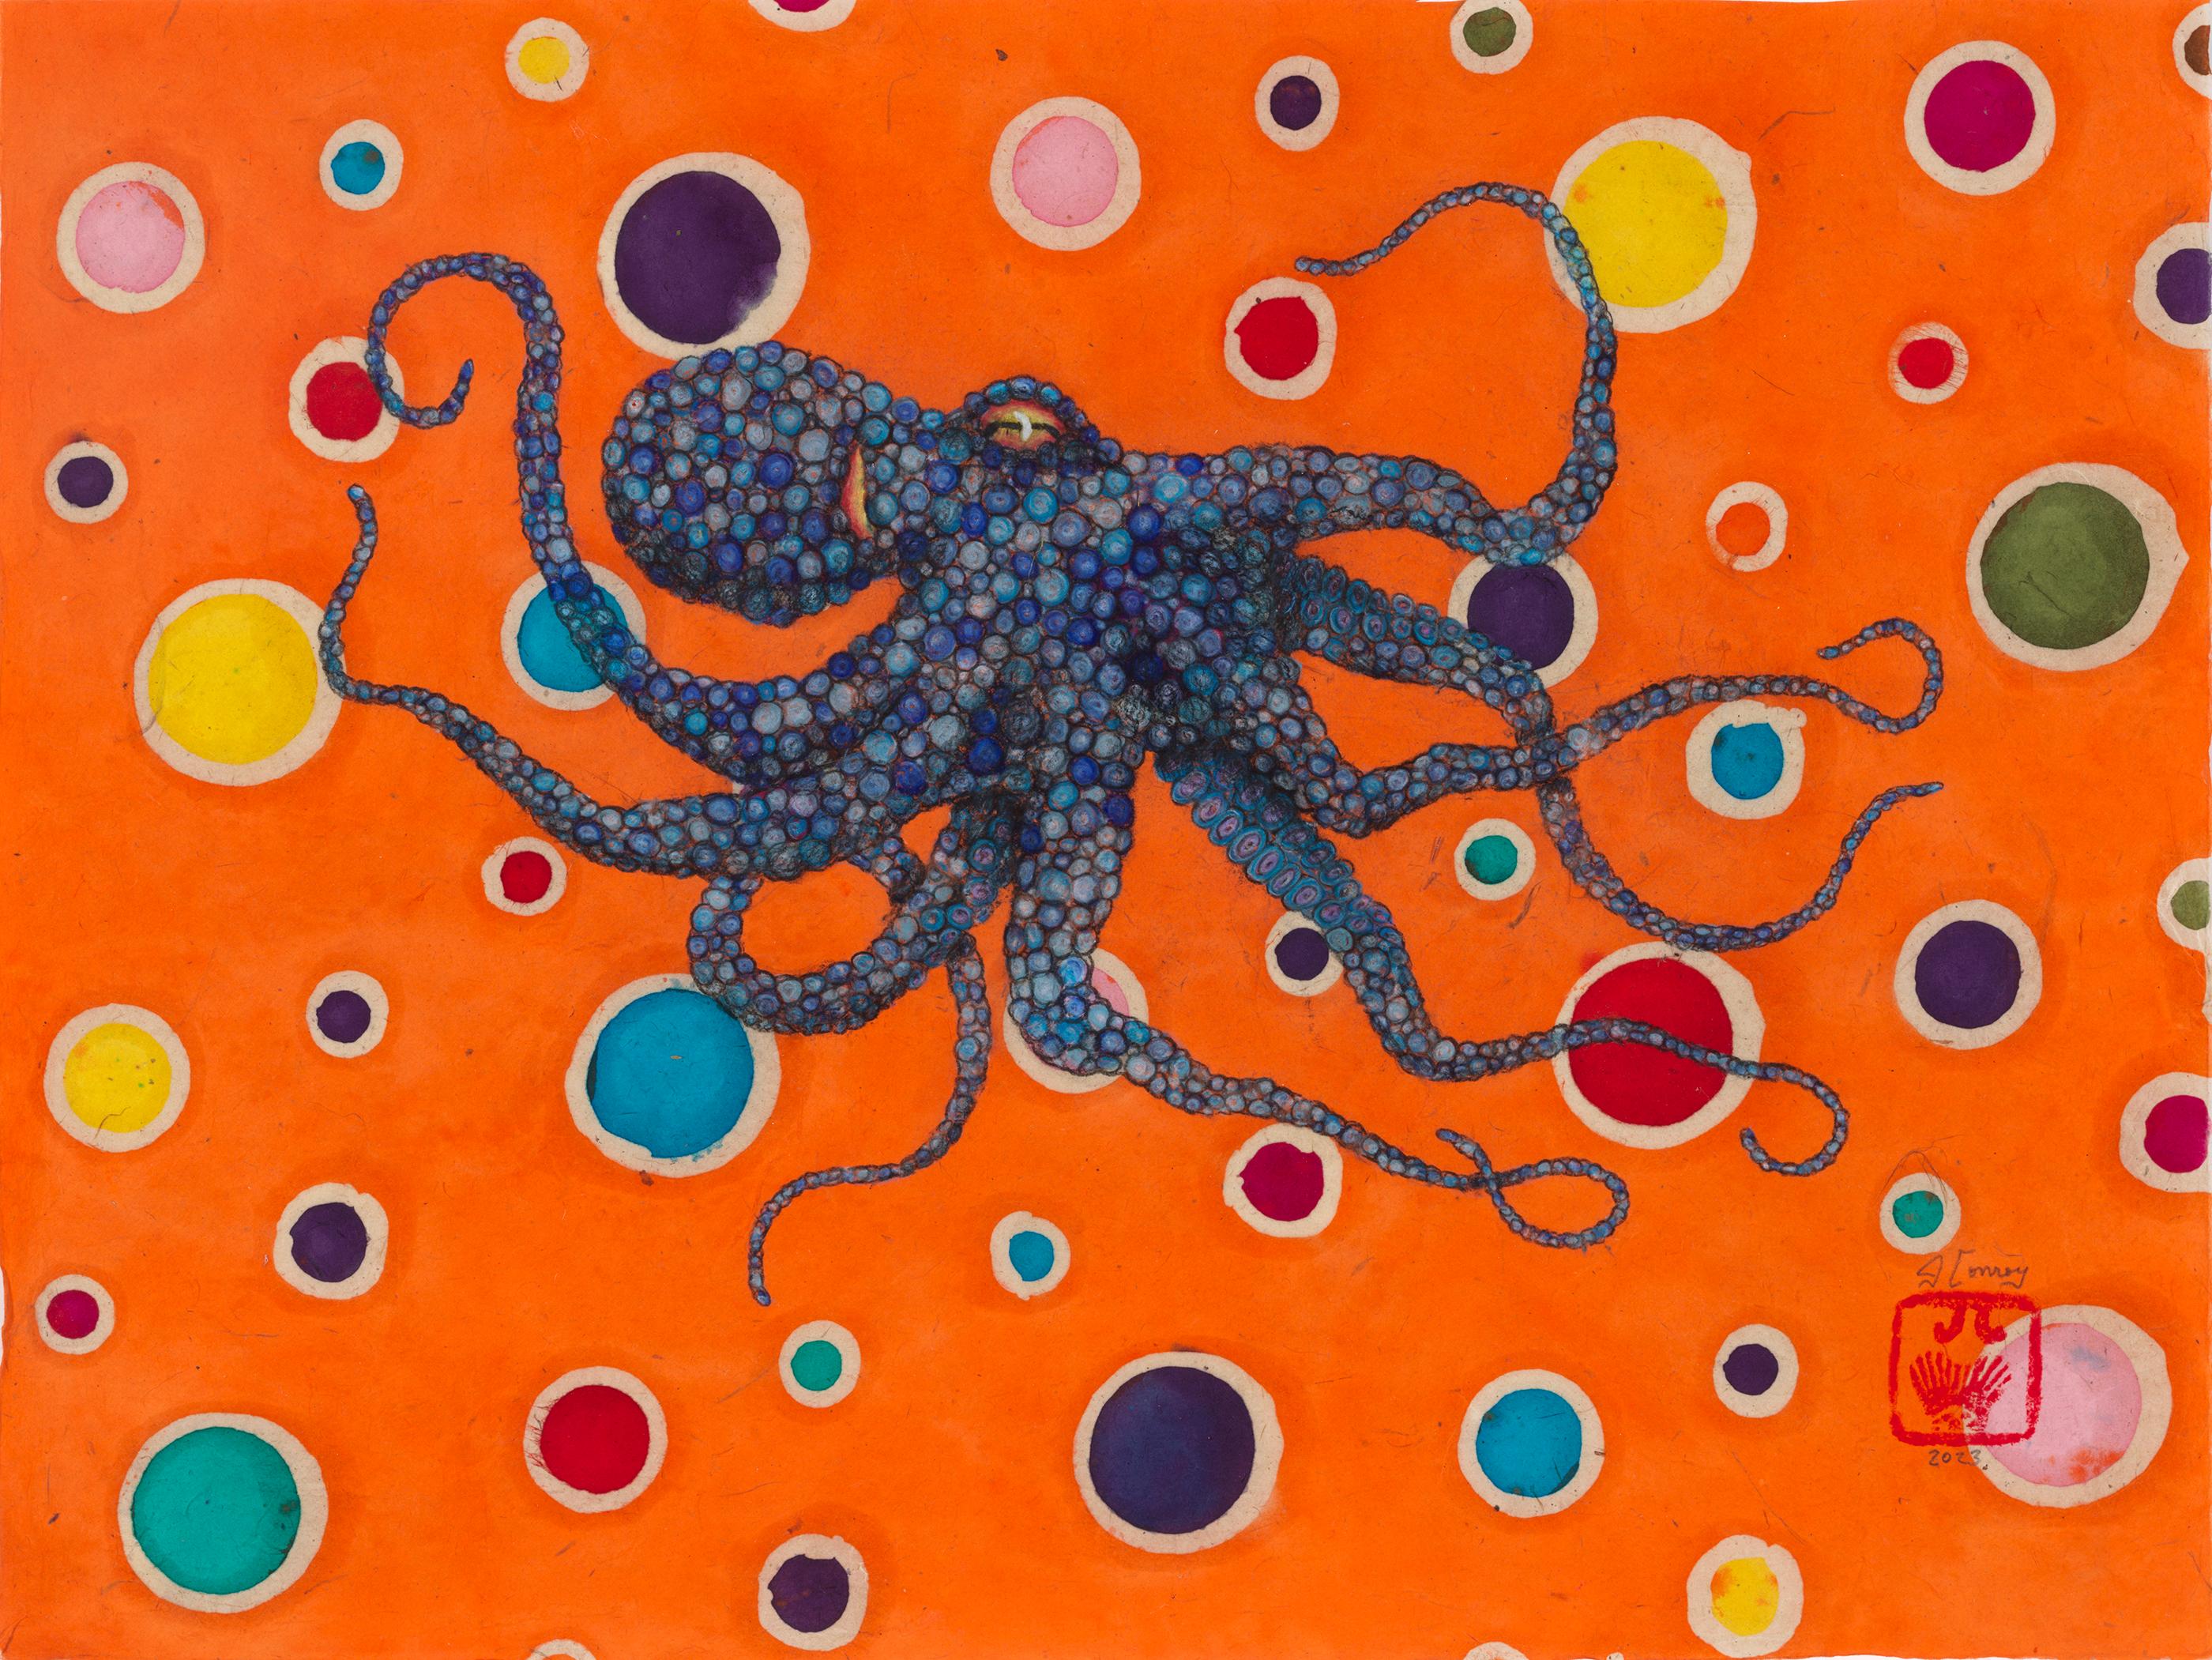 Jeff Conroy Animal Painting - Mr. Bubbles - Blue Agave - Gyotaku Style Sumi Ink Painting of an Octopus 